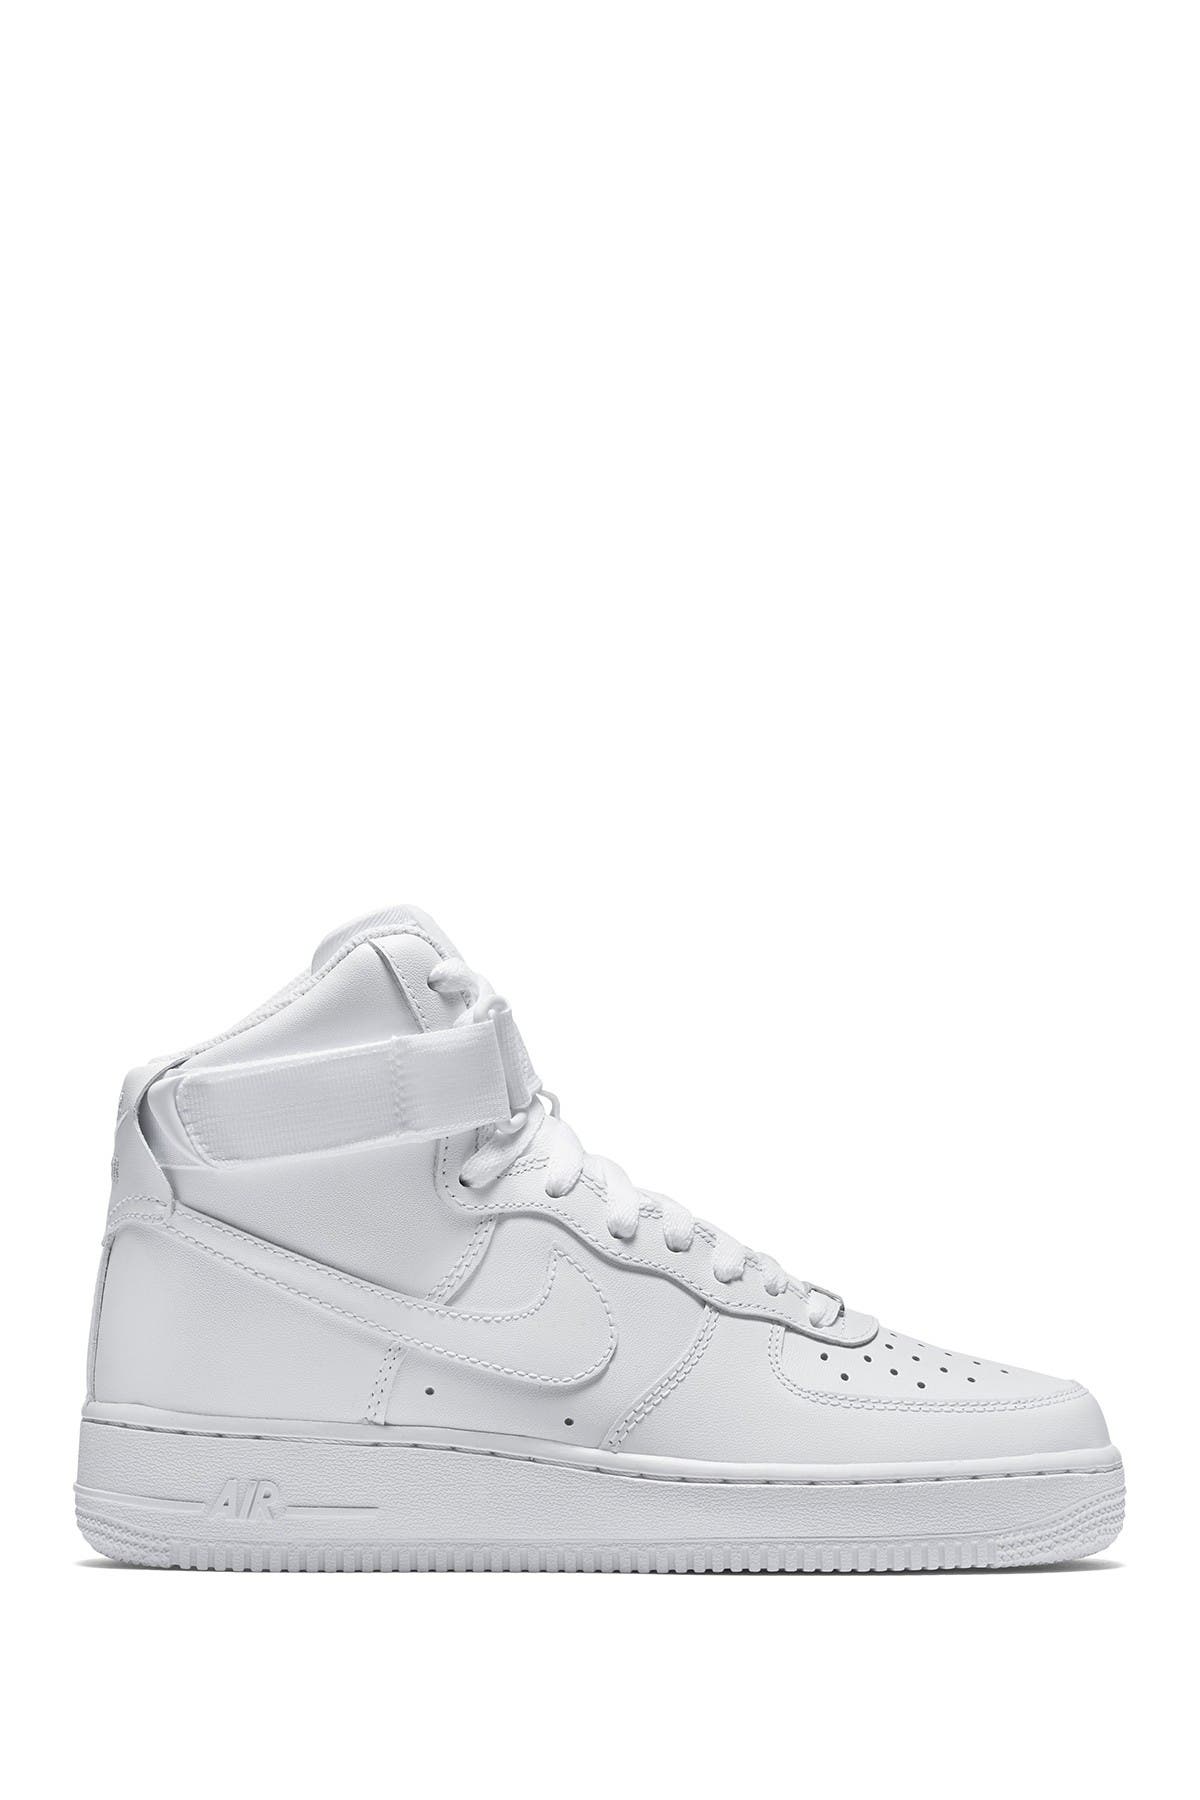 nordstrom air force 1